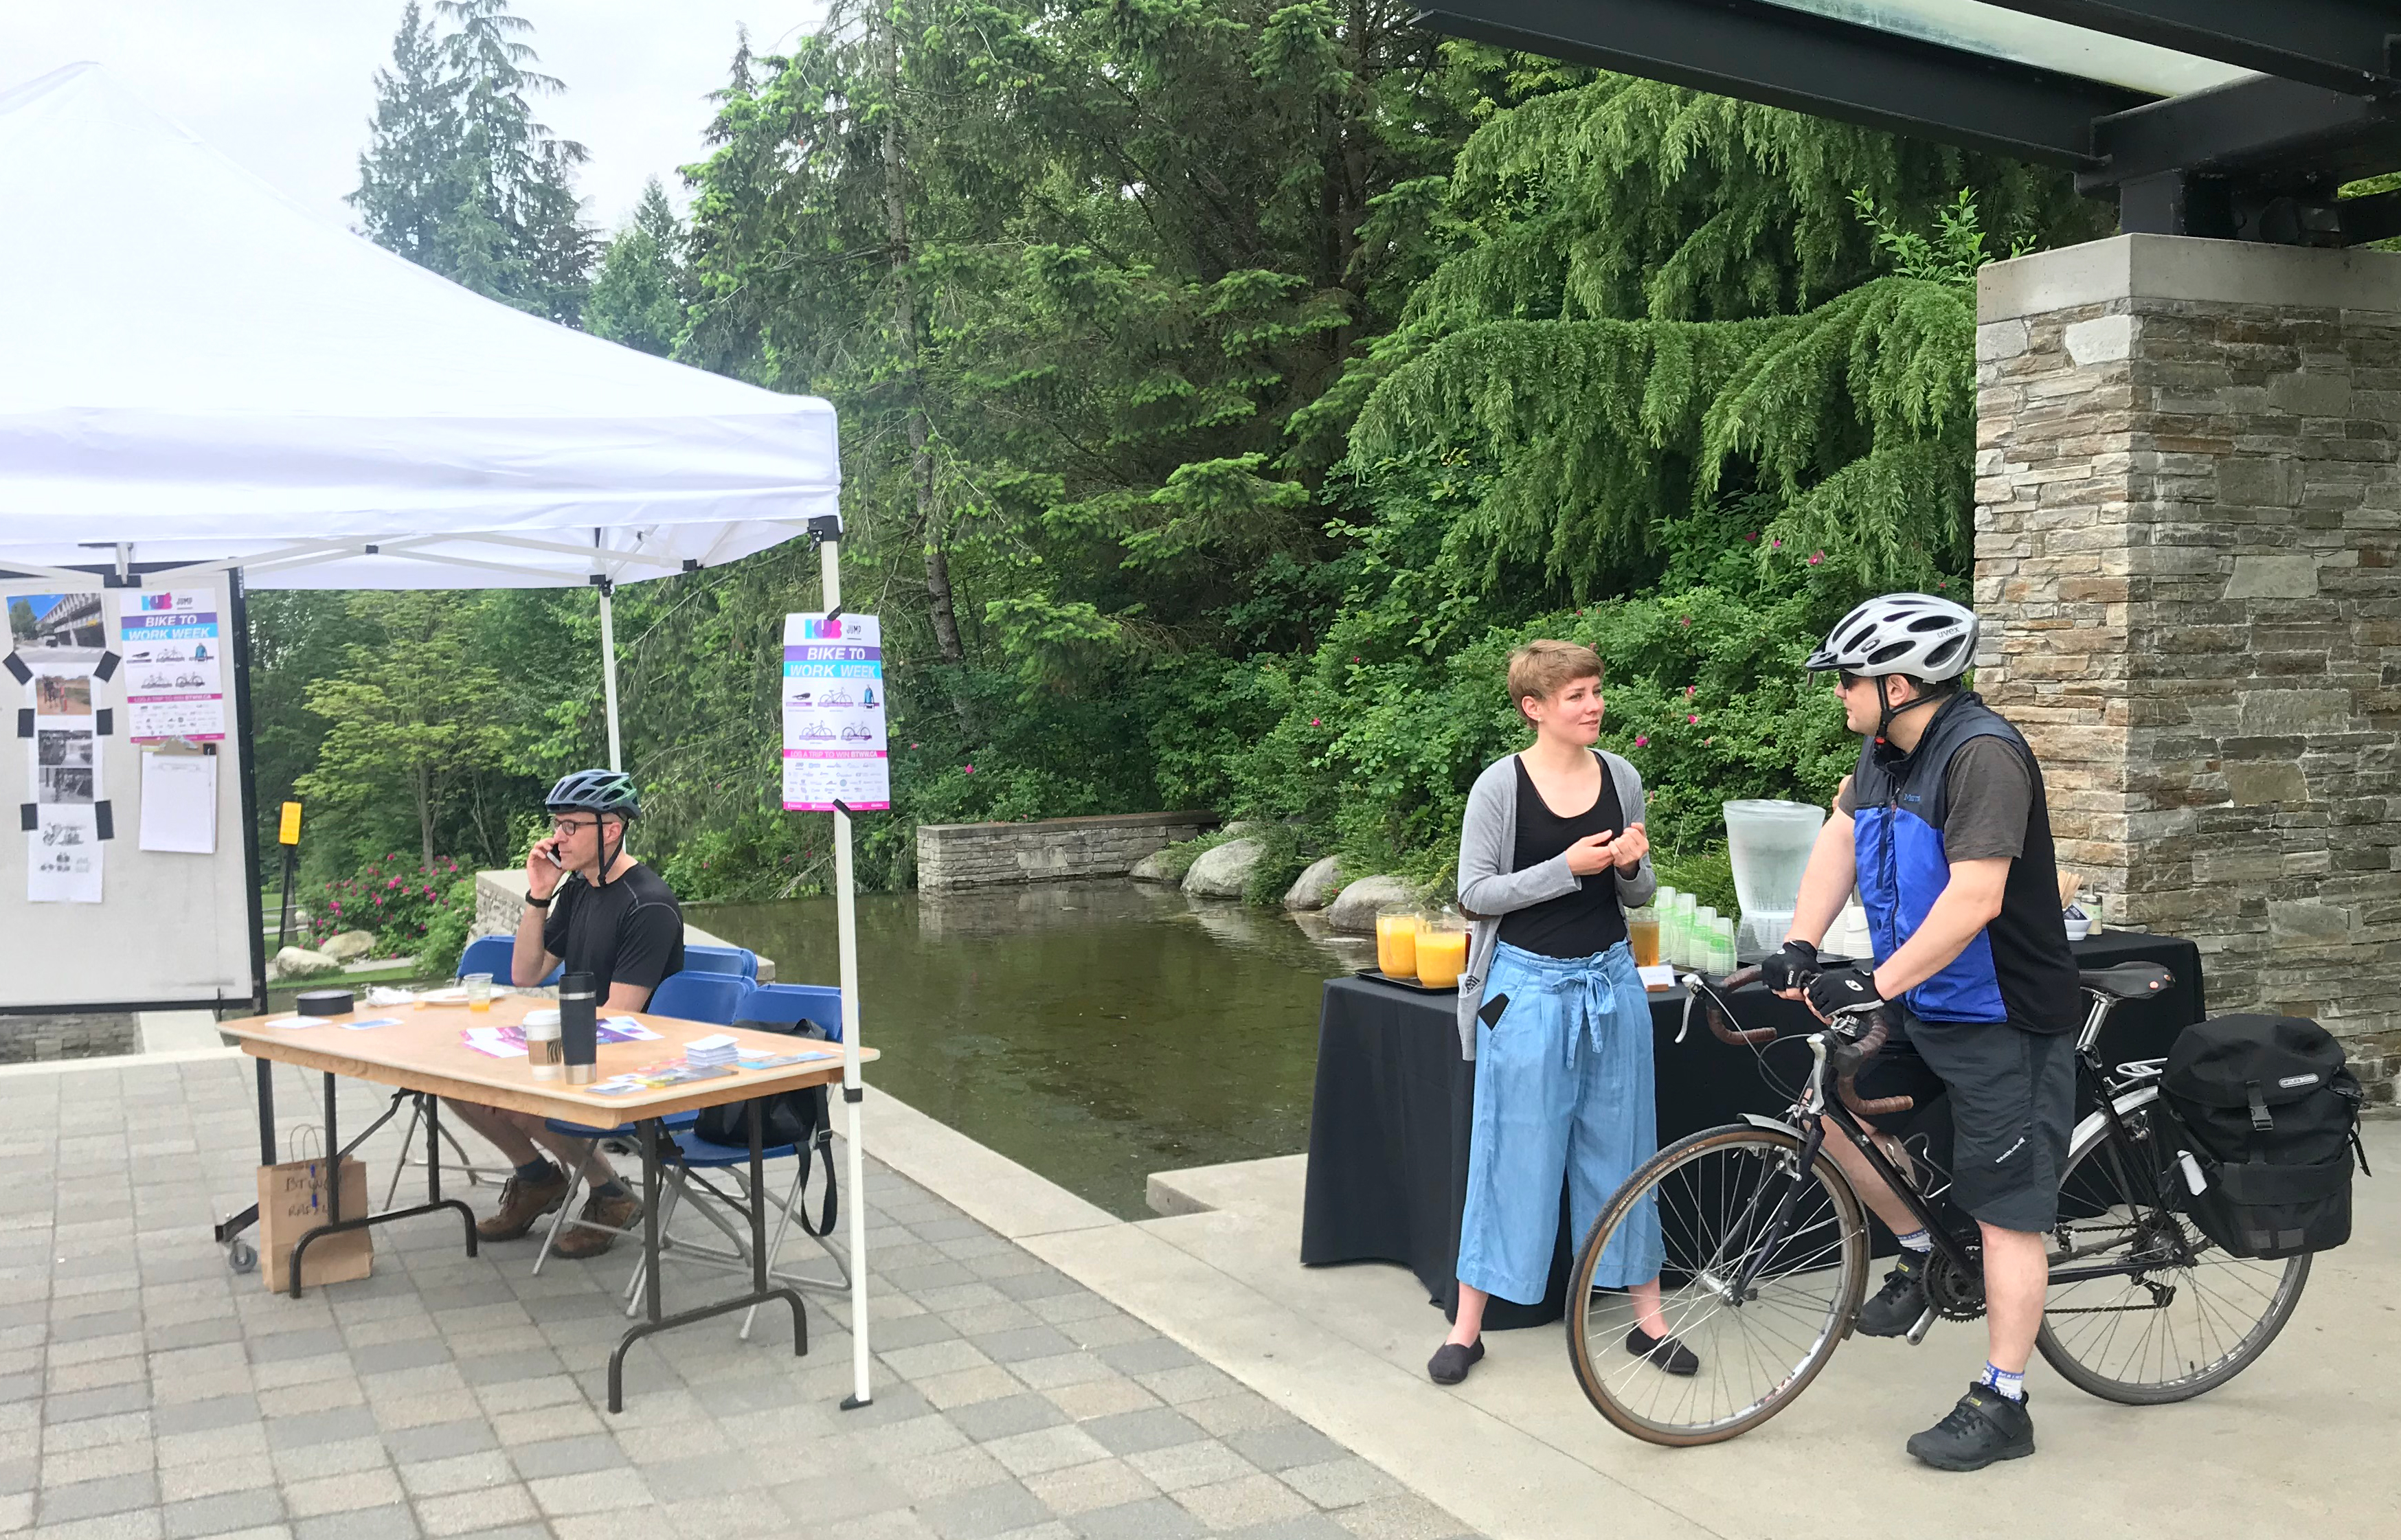 Andrew Boden, Executive Director for APSA participates in Bike to Work week